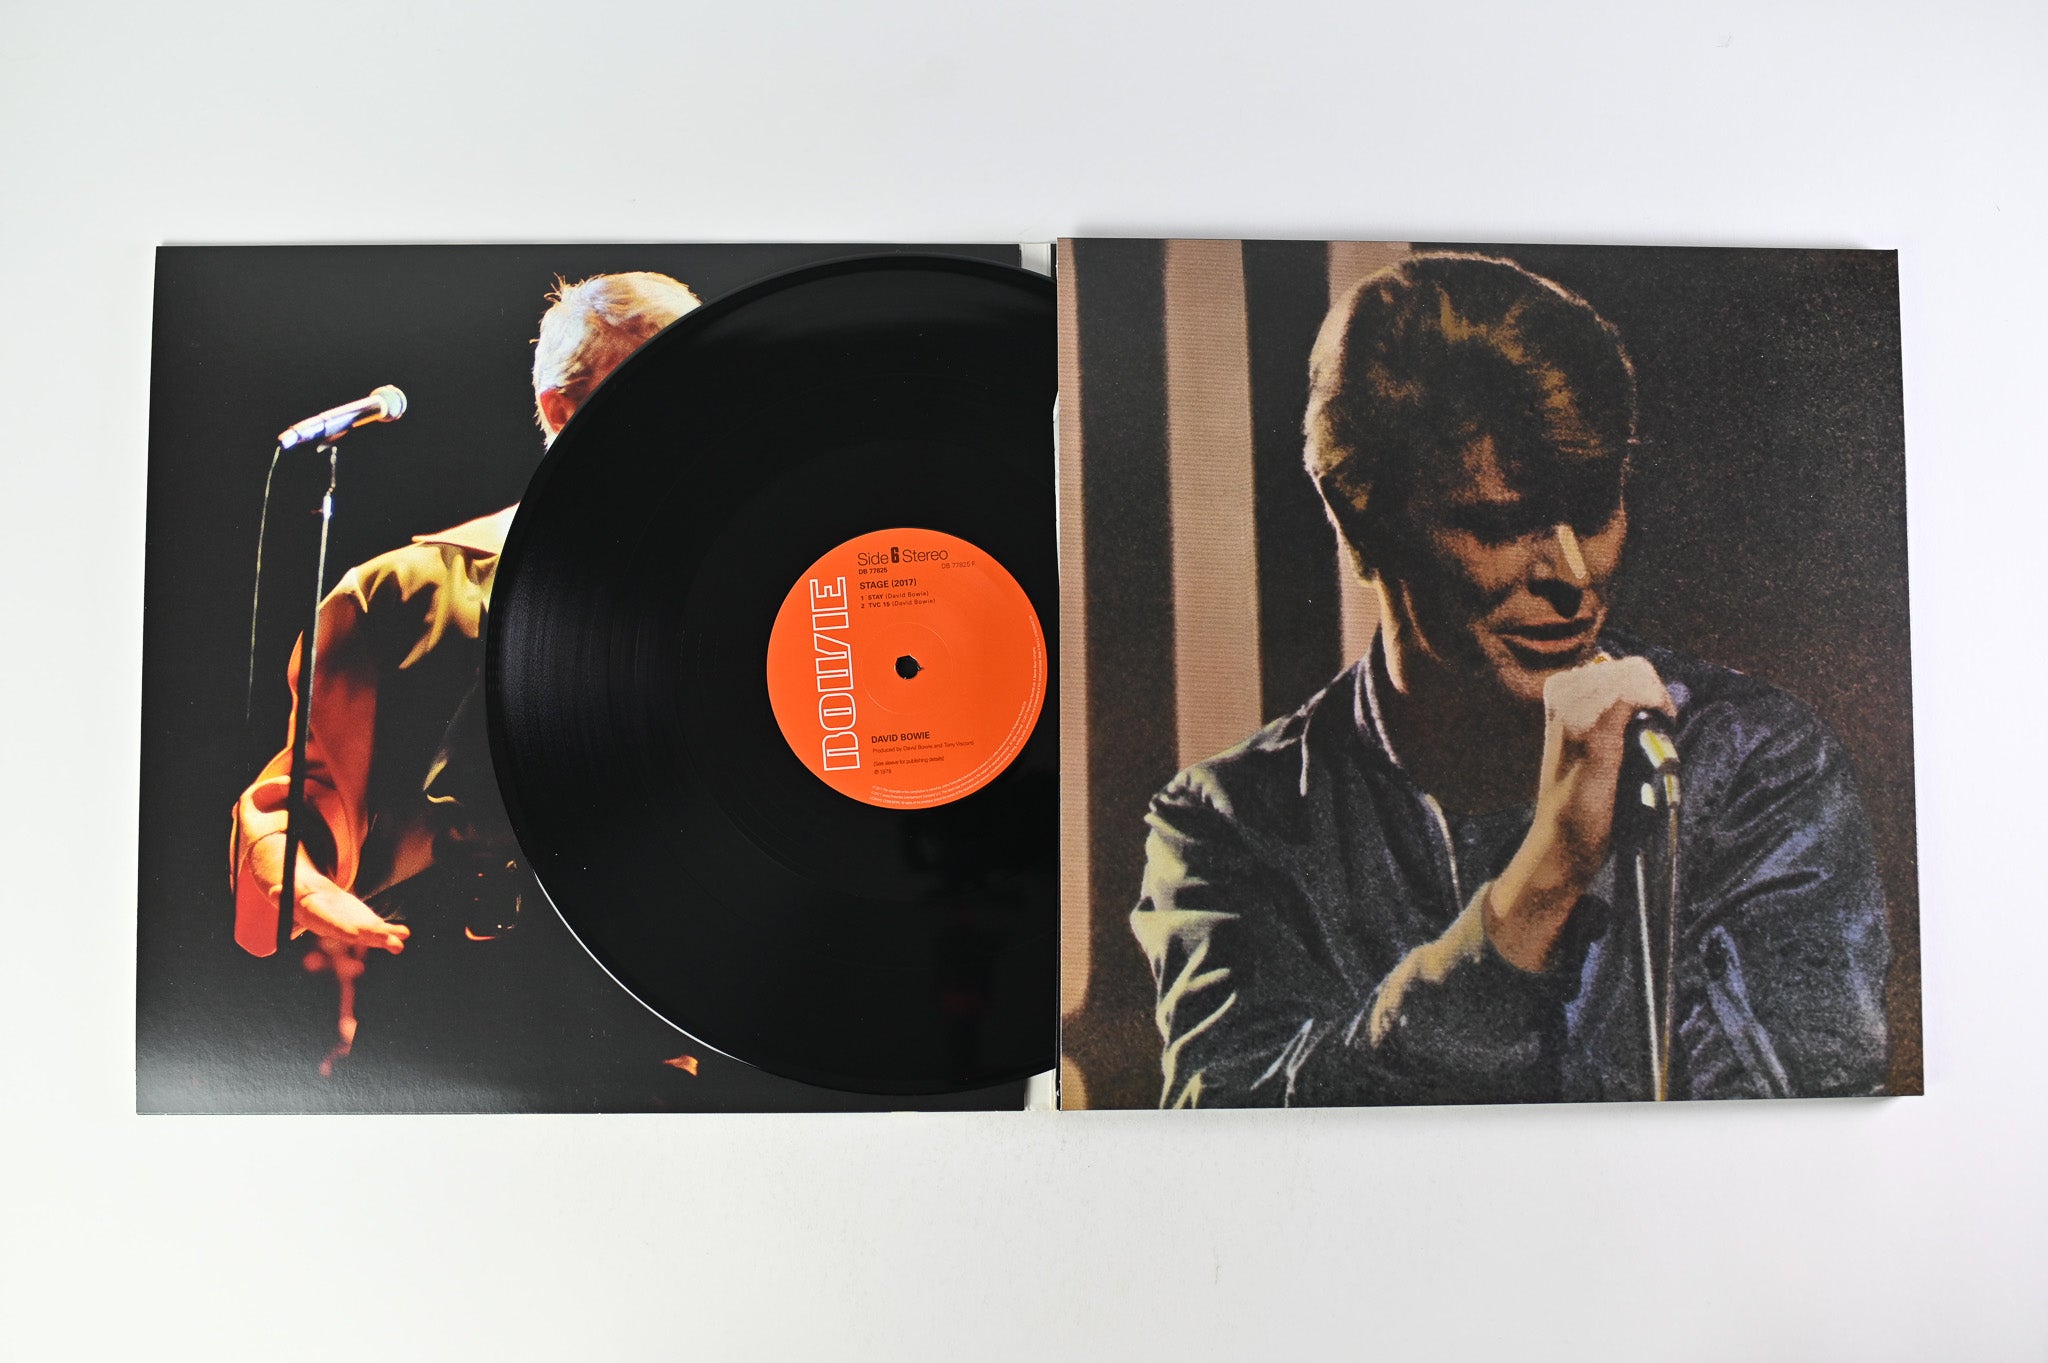 David Bowie - A New Career In A New Town [ 1977–1982 ] on Parlophone Remastered Reissue Box Set